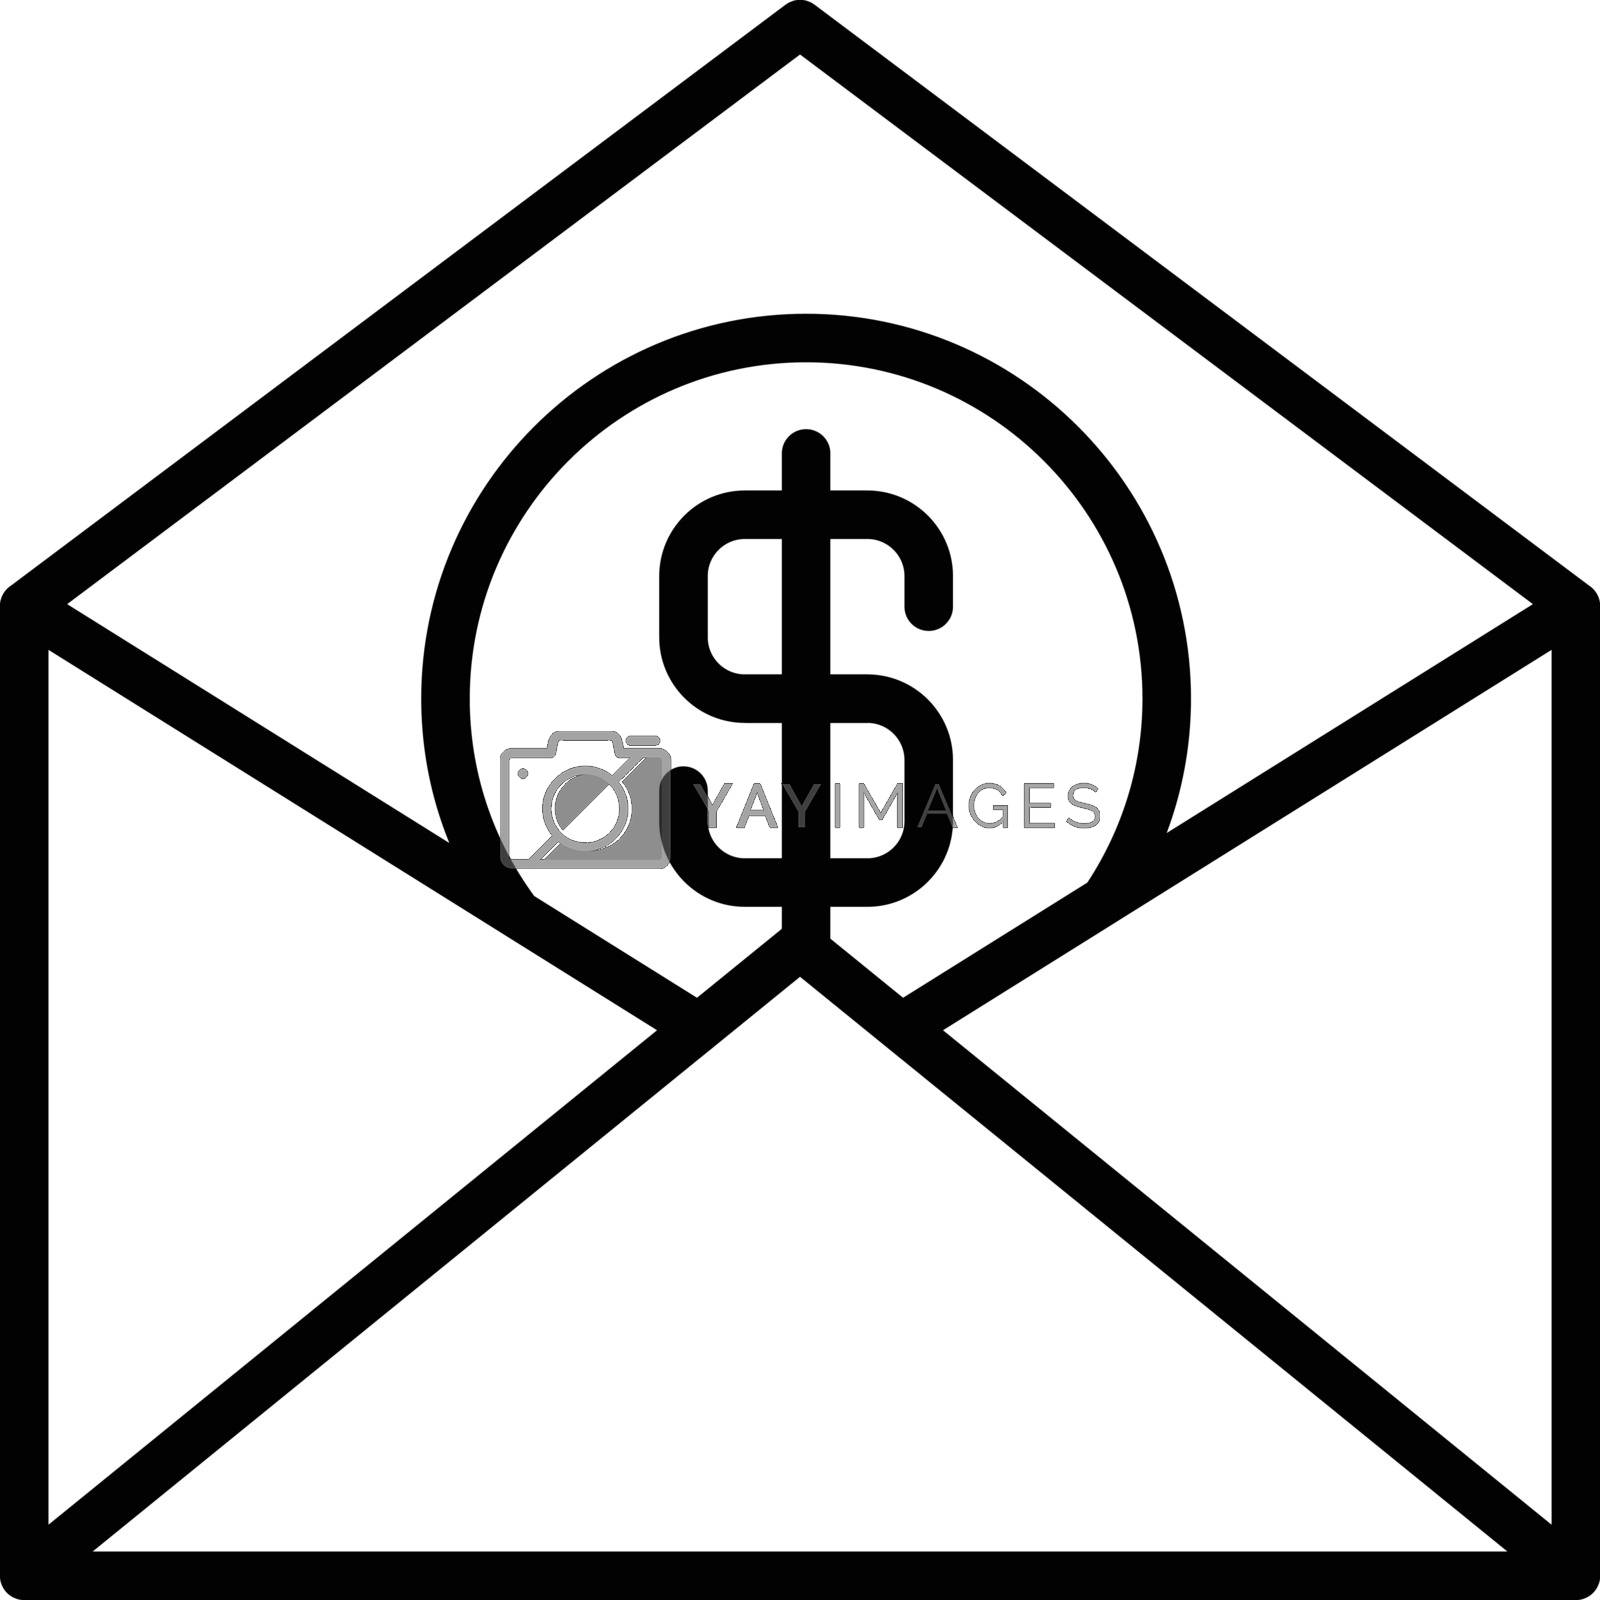 Royalty free image of envelope  by vectorstall